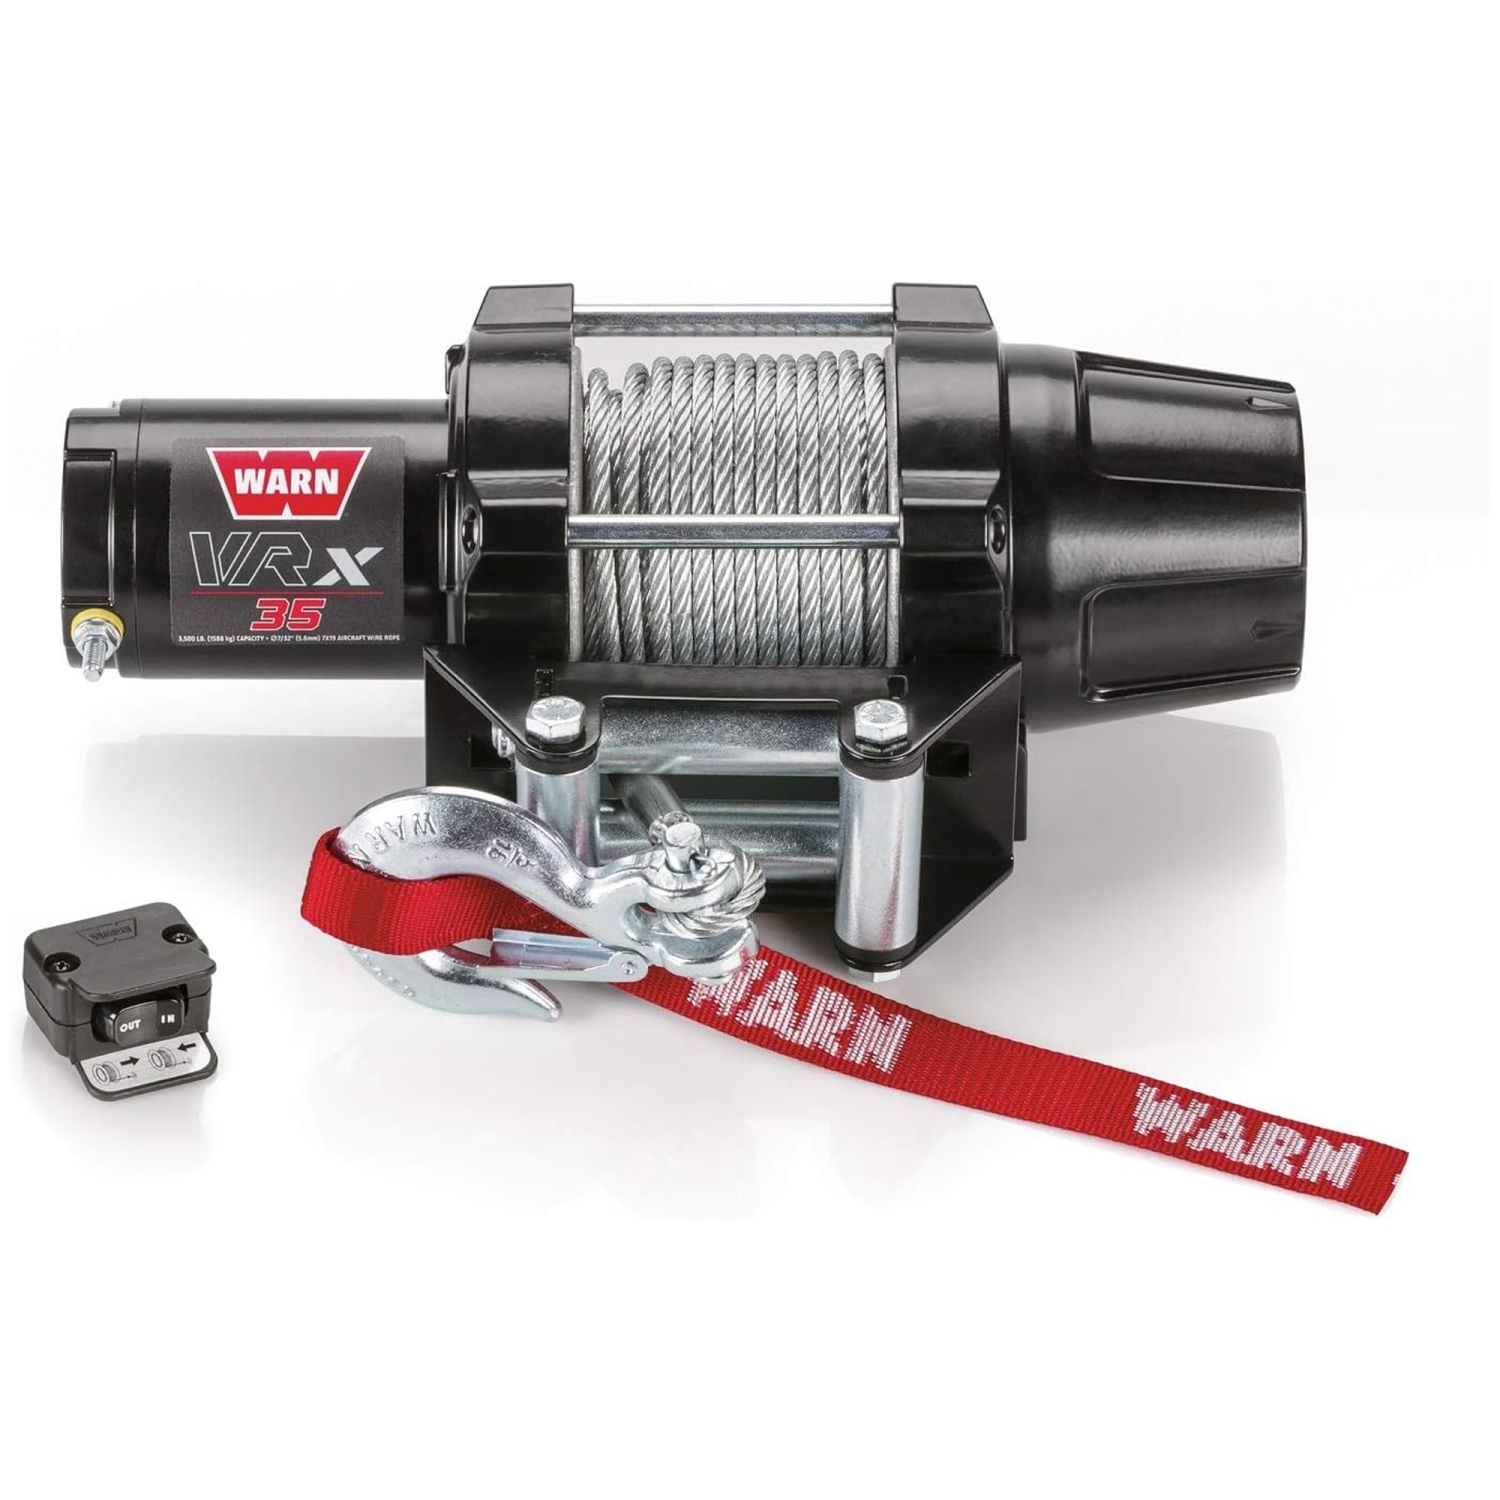 Warn Industries 101035 VRX 35 Powersports Winch with Steel Rope